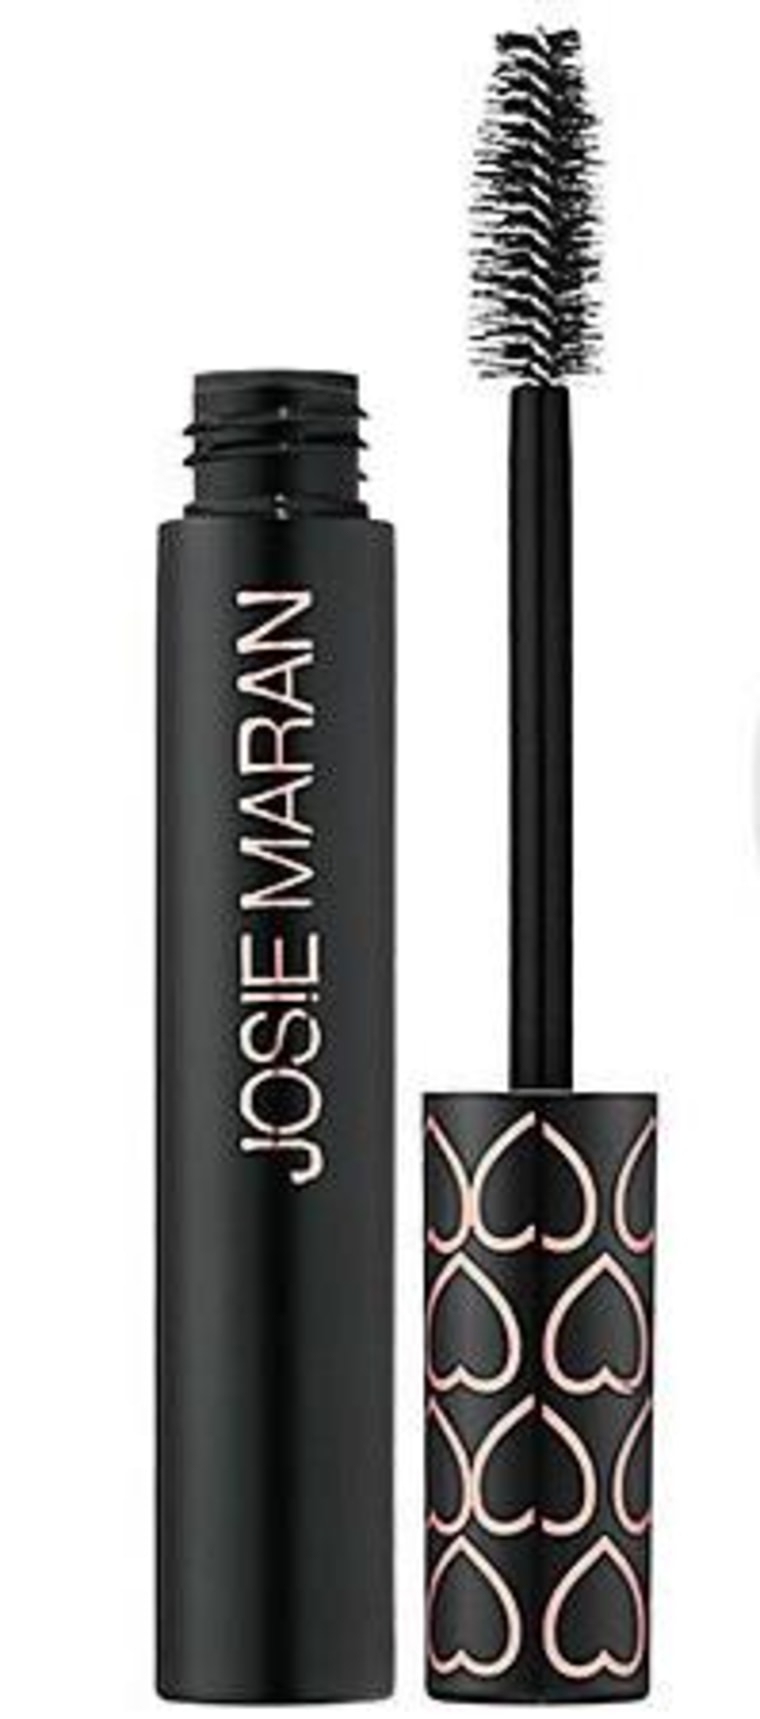 Even Josie Maran's GOGO mascara is infused with argan oil.